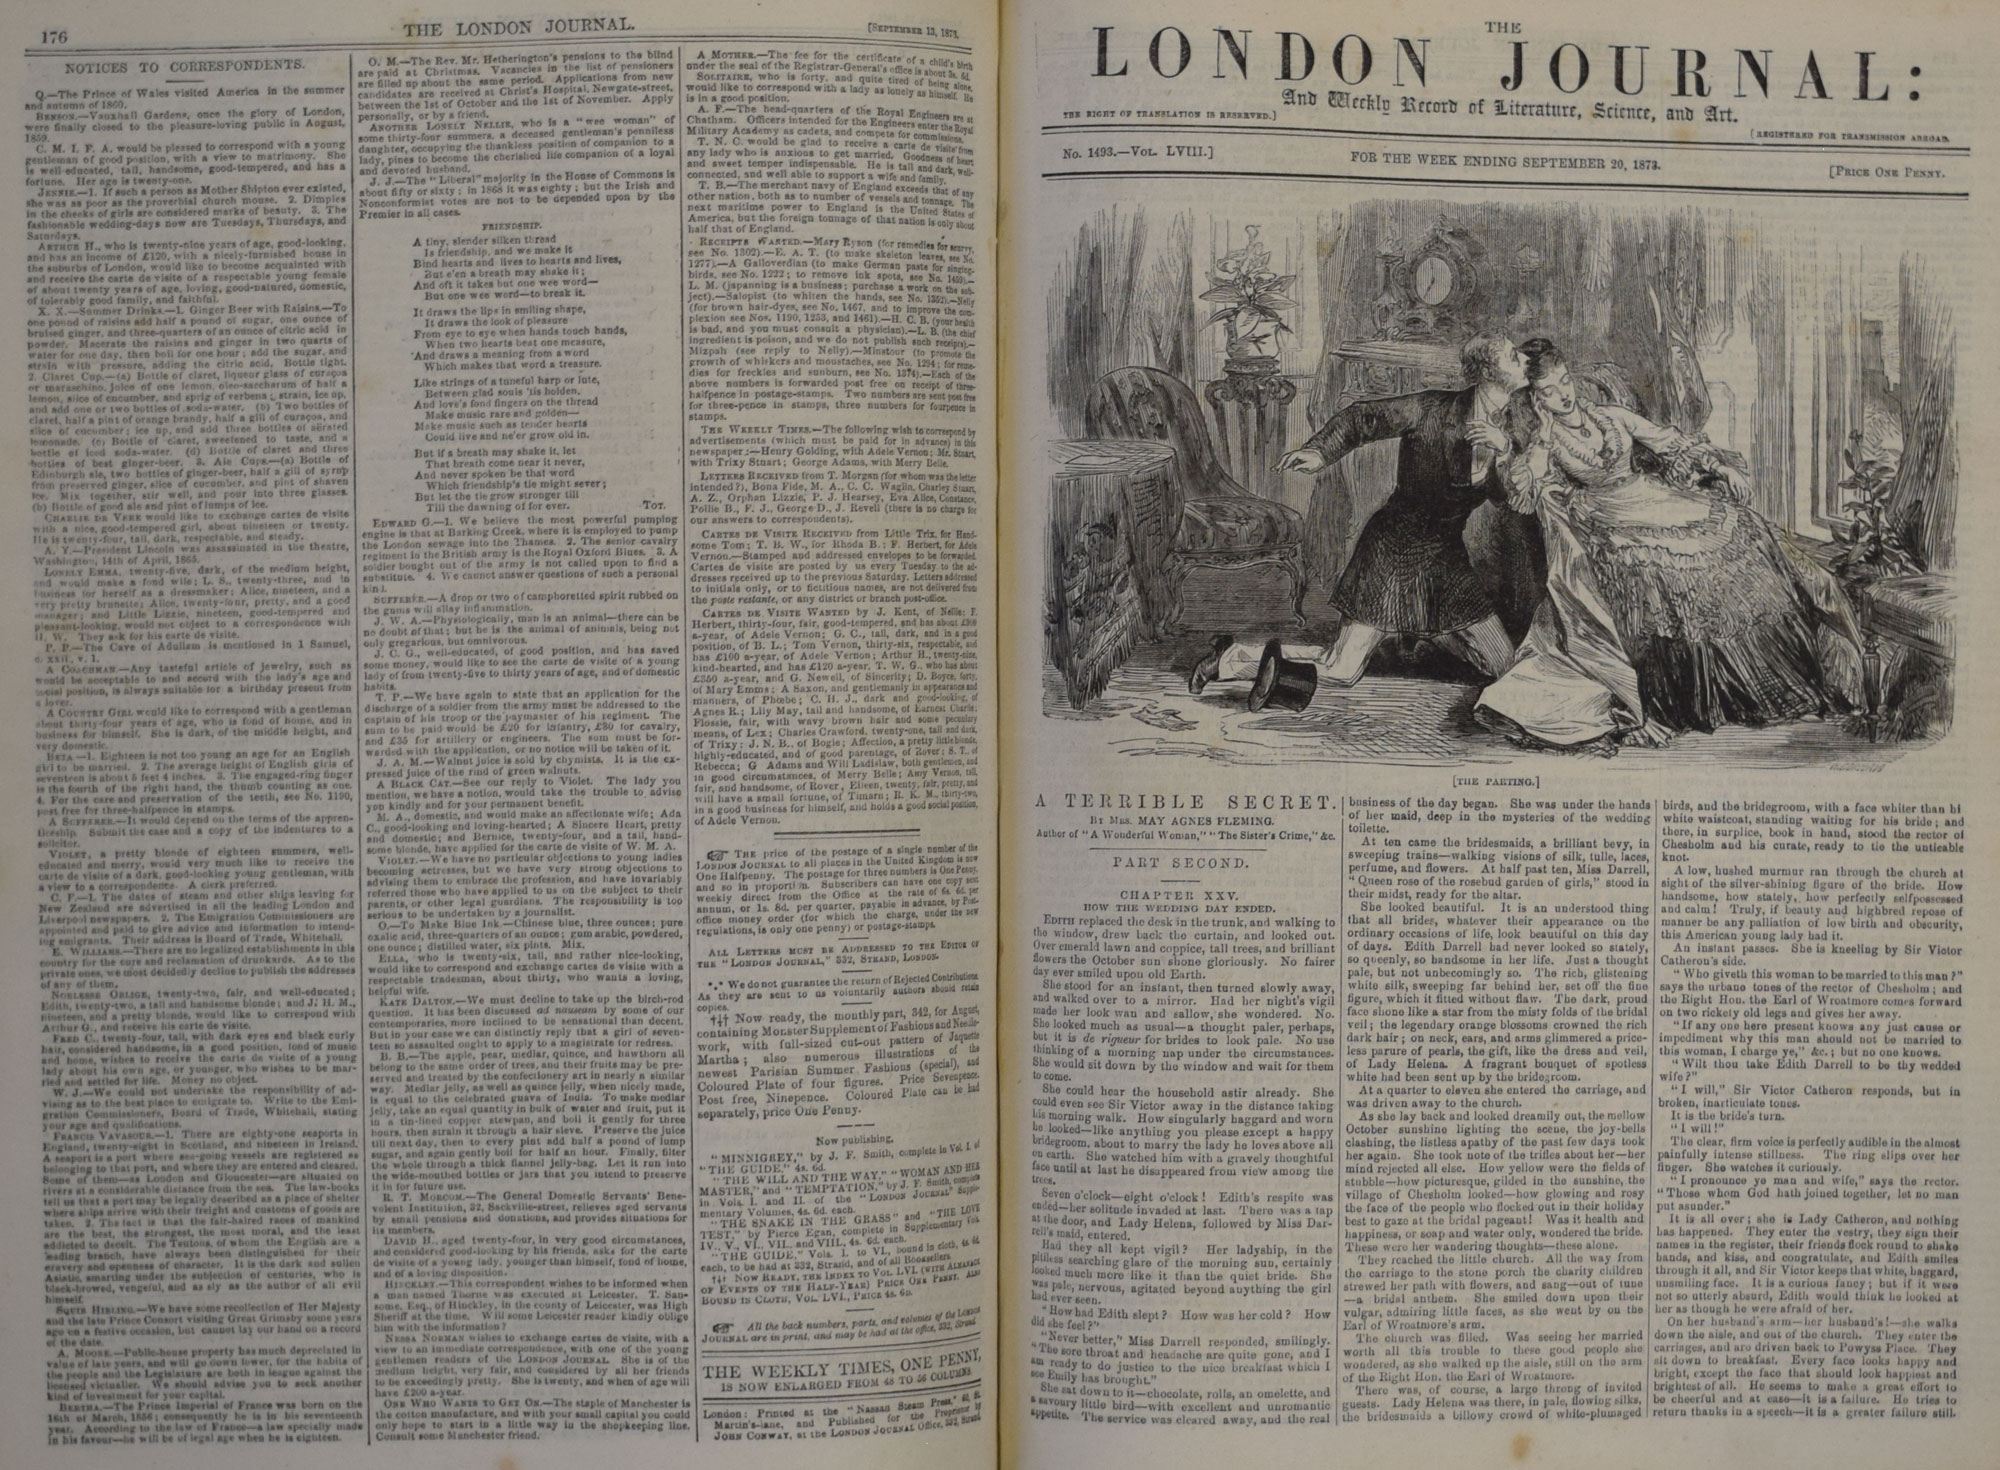 The London Journal: and Weekly Record of Literature Science and Art. Volumes LVII - LVIII. January - December 1873.